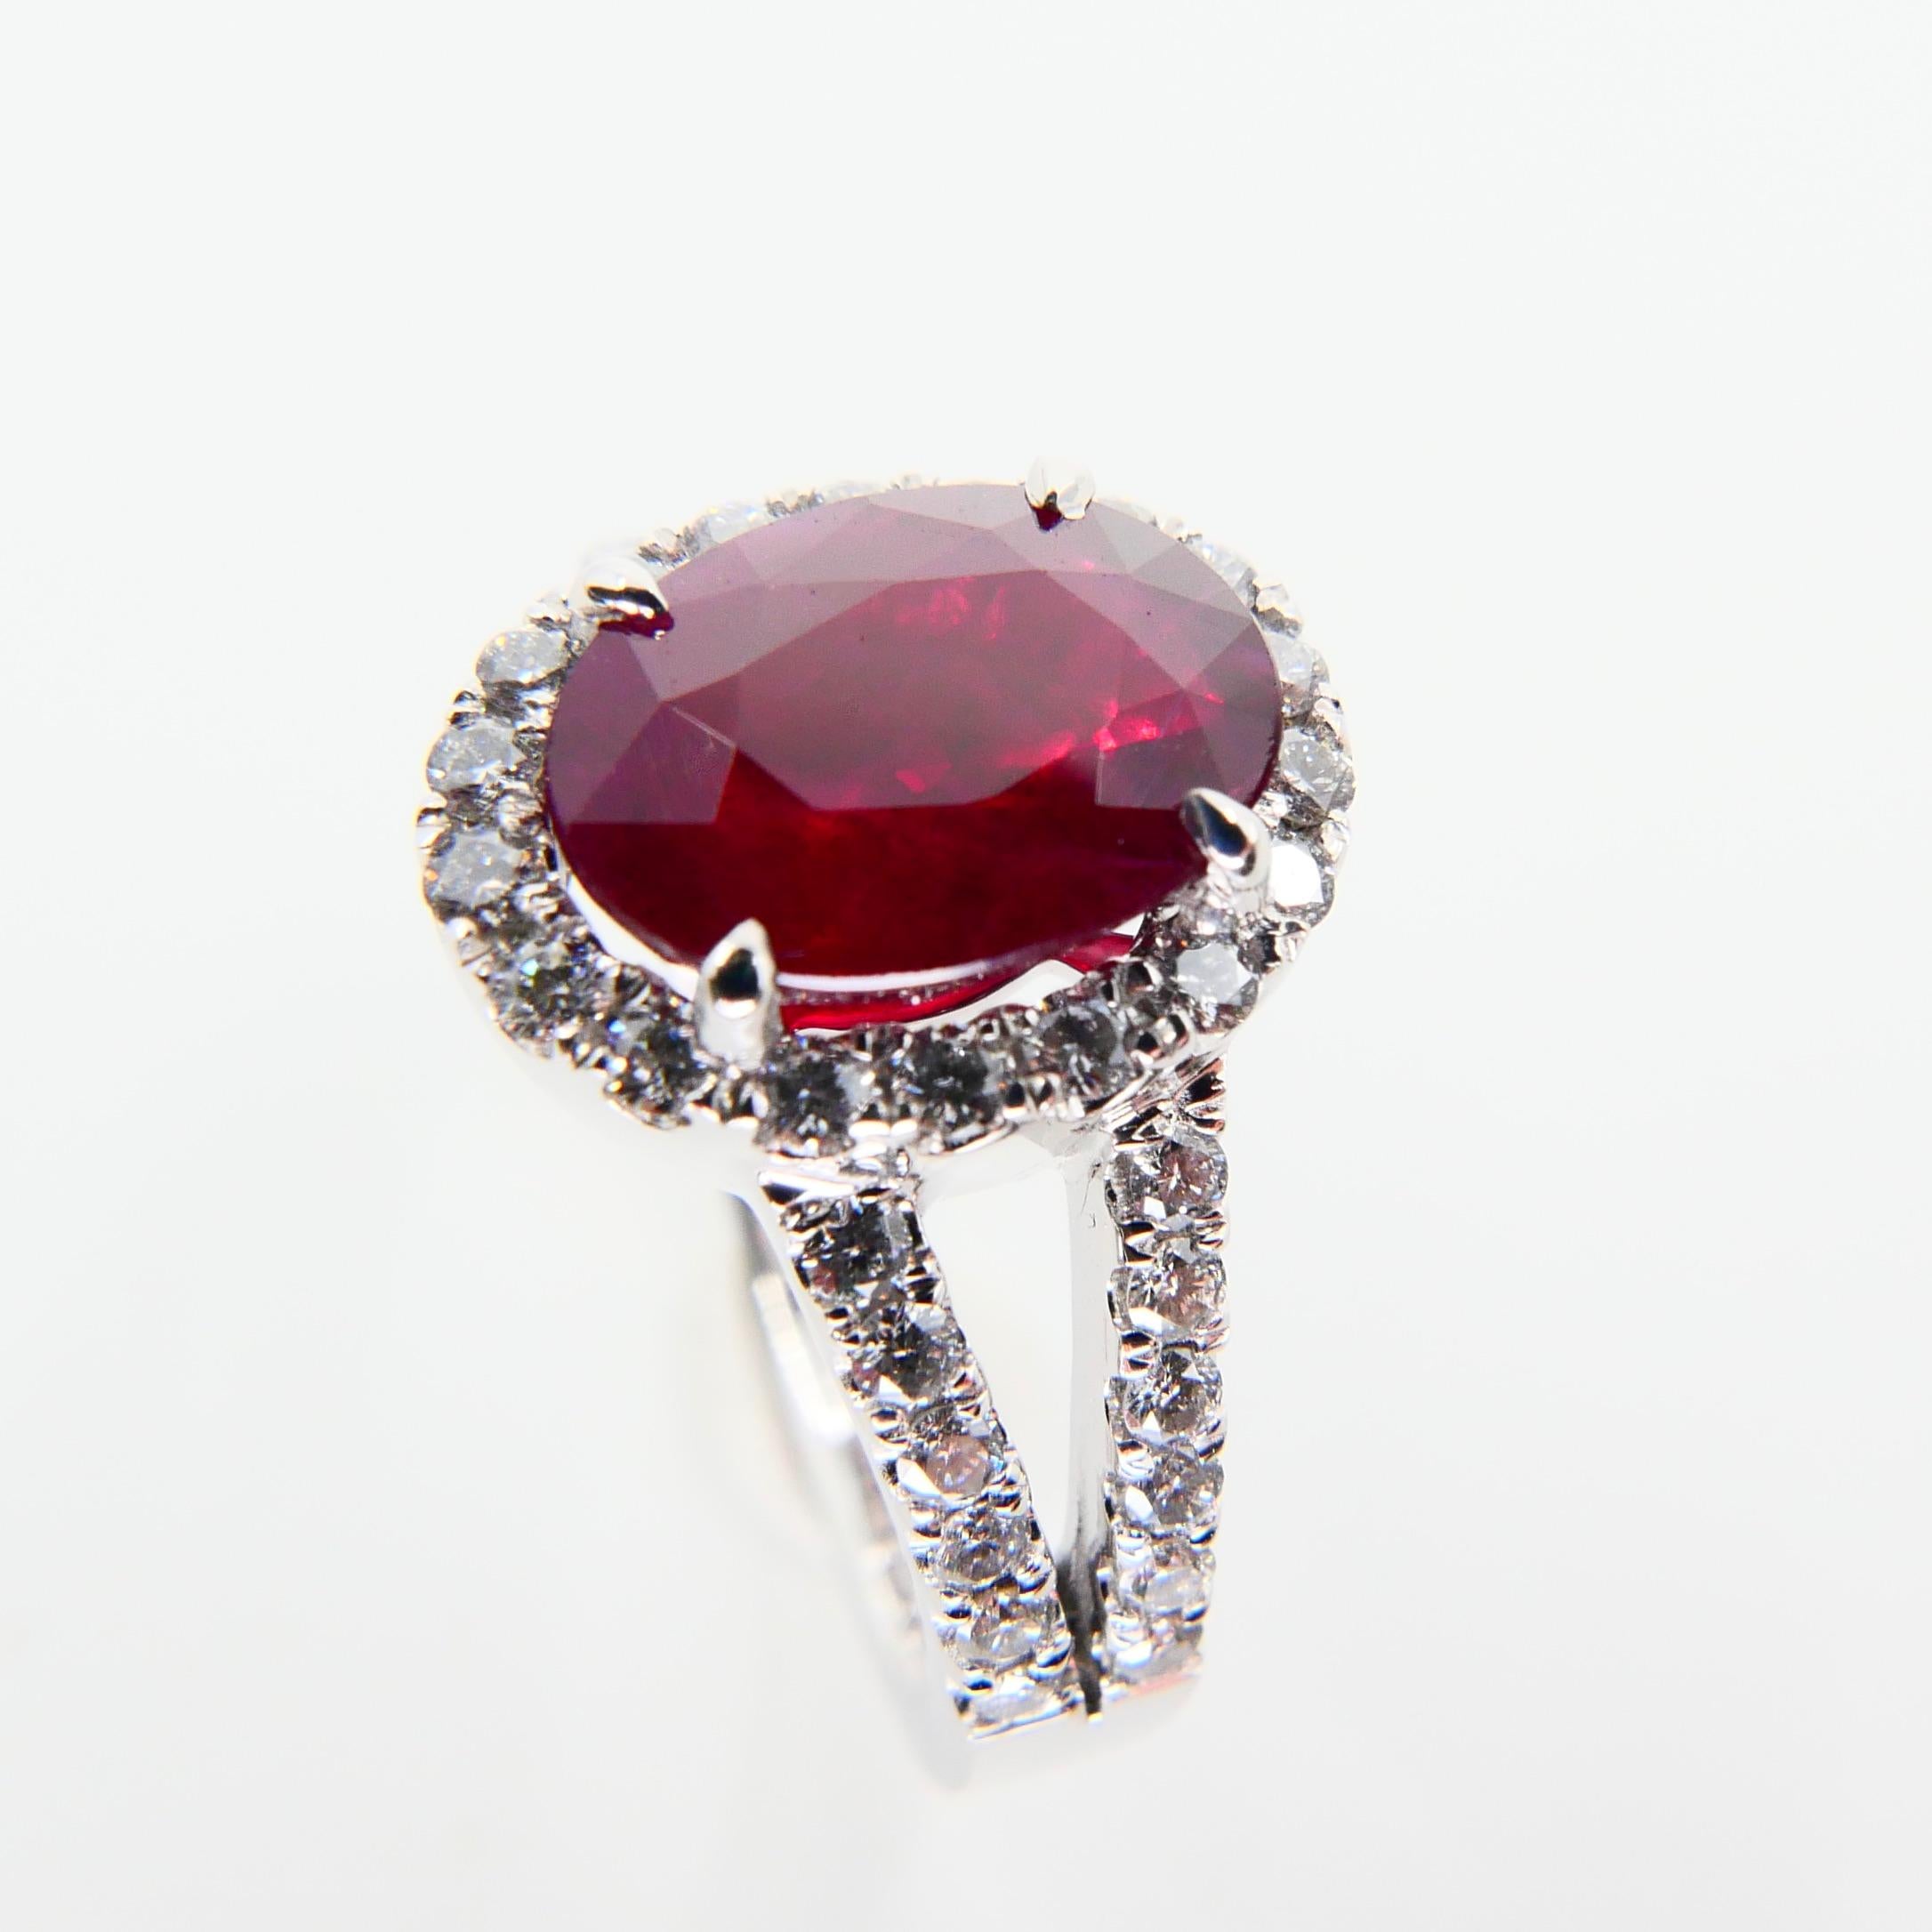 Contemporary Certified Natural Ruby 2.56 Carat and Diamond Cocktail Ring, 18 Karat White Gold